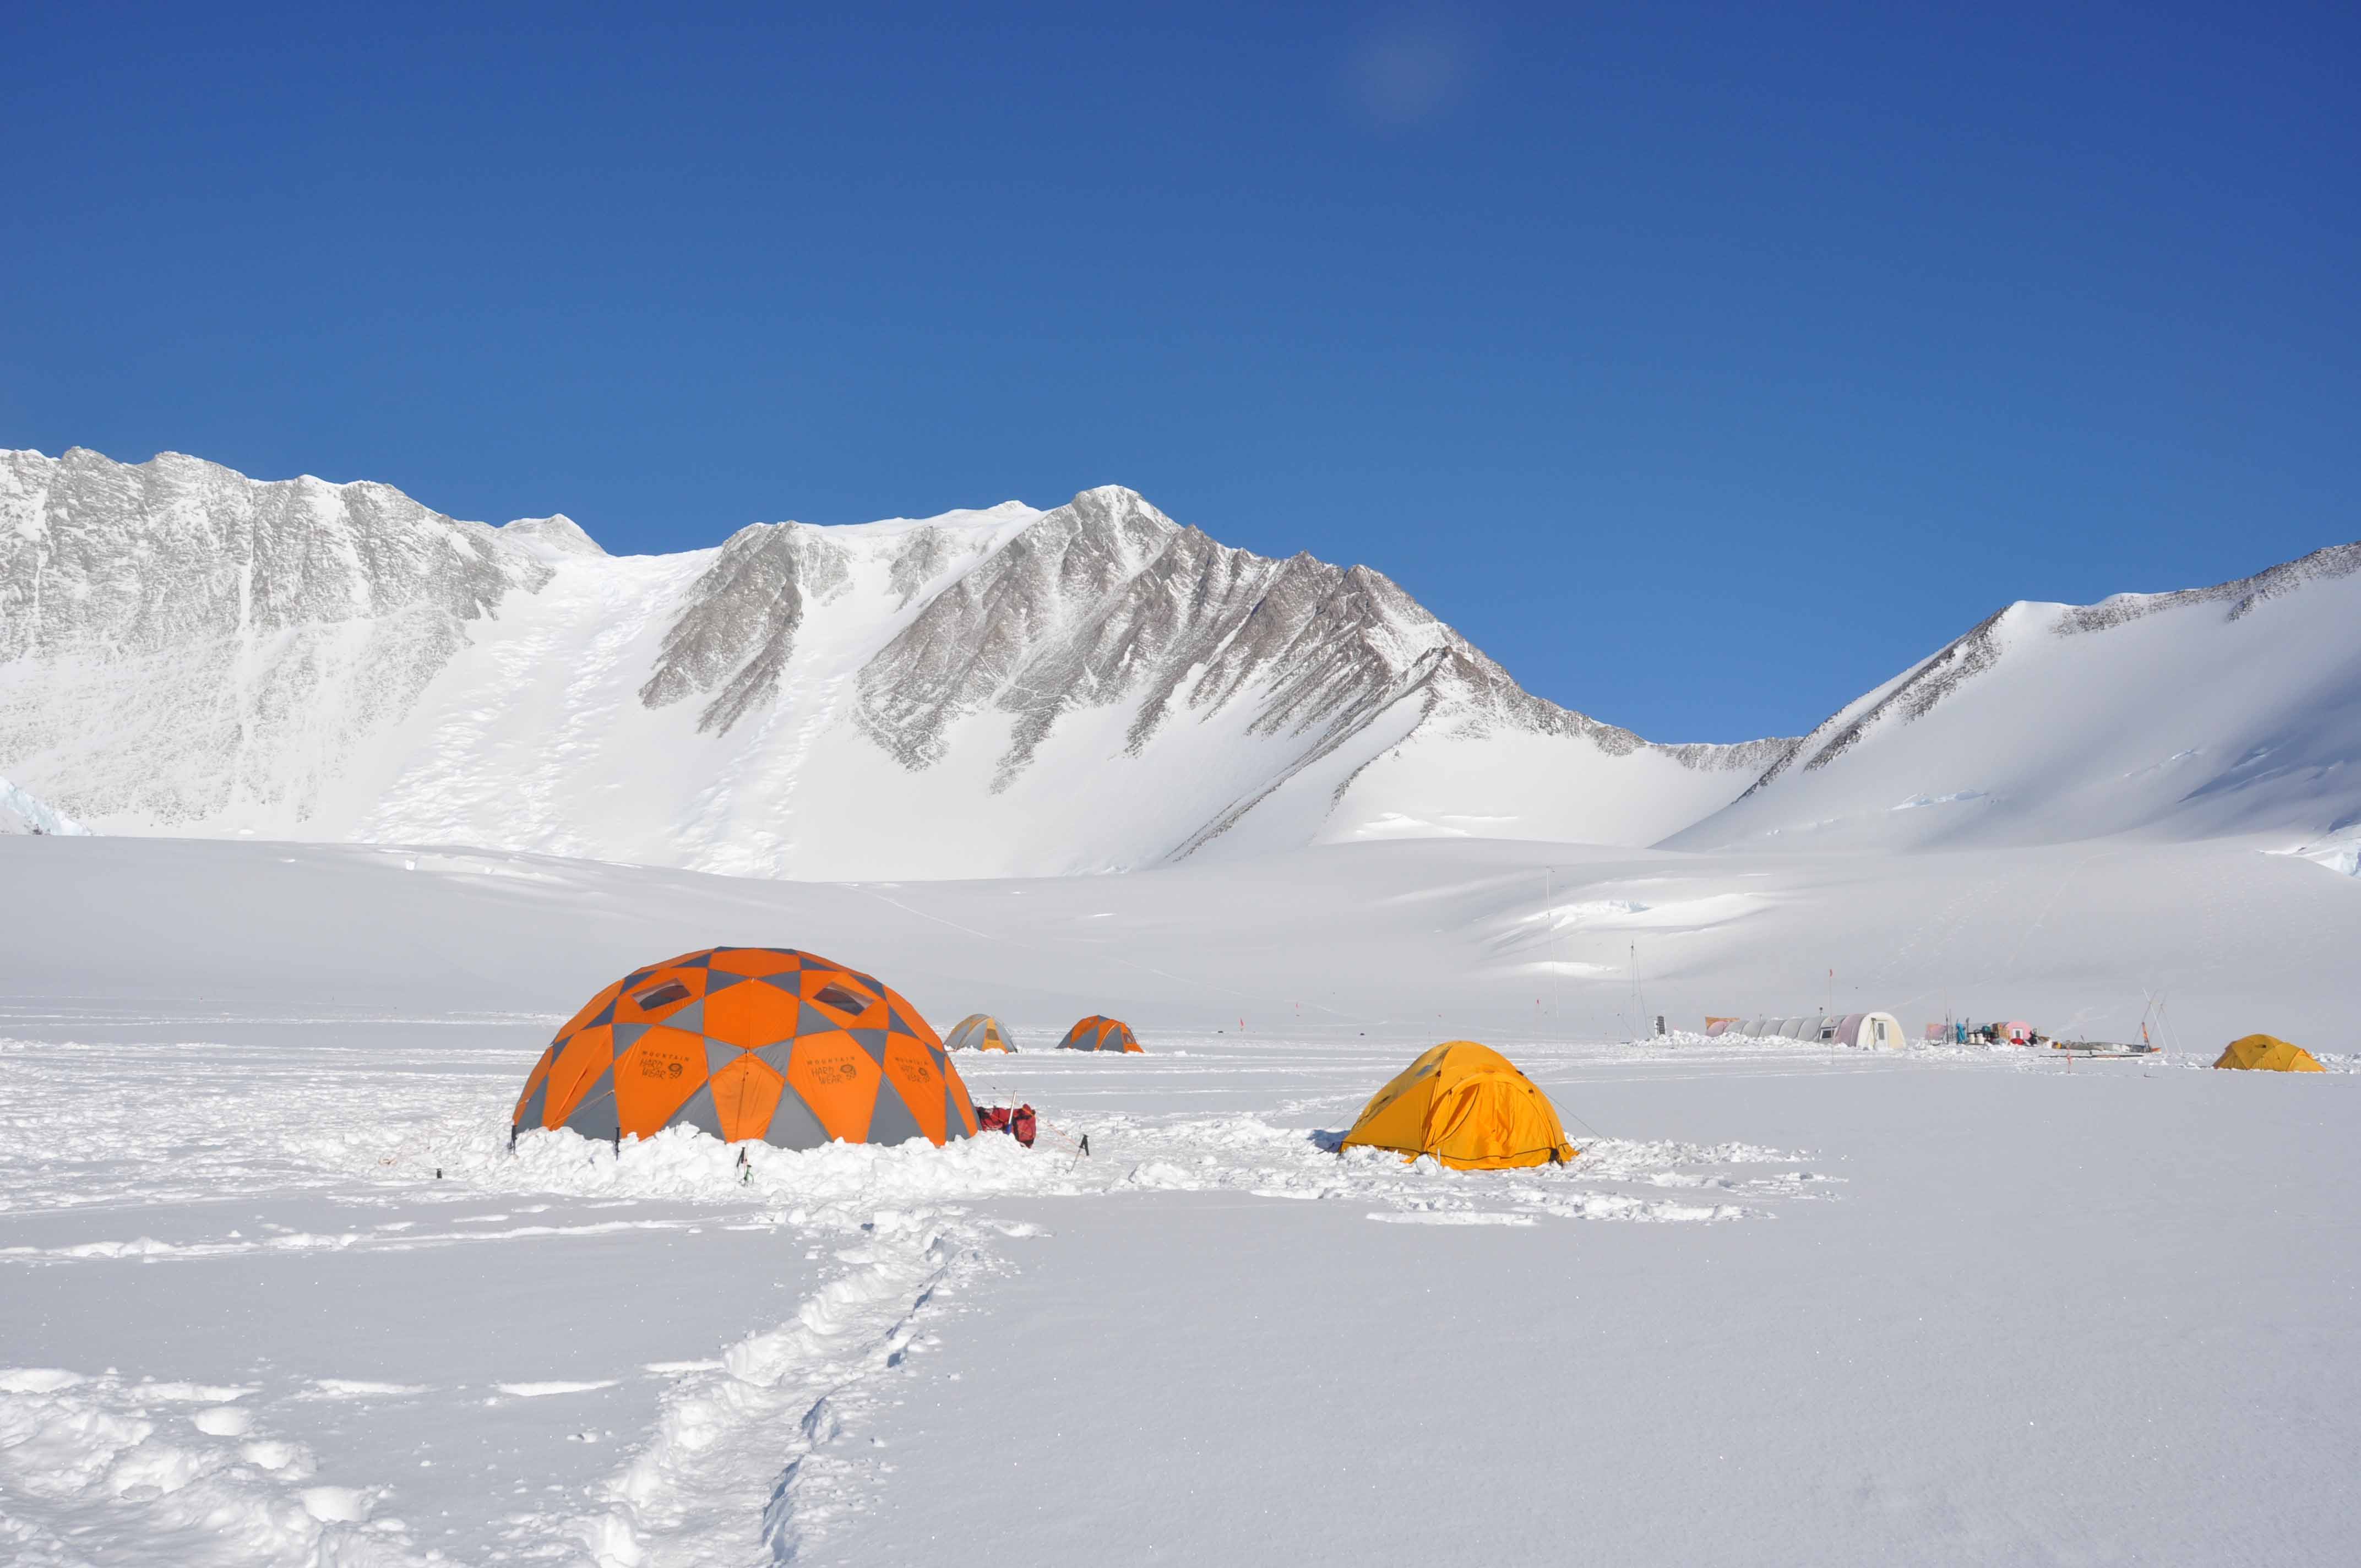 Hello from low camp on Mount Vinson